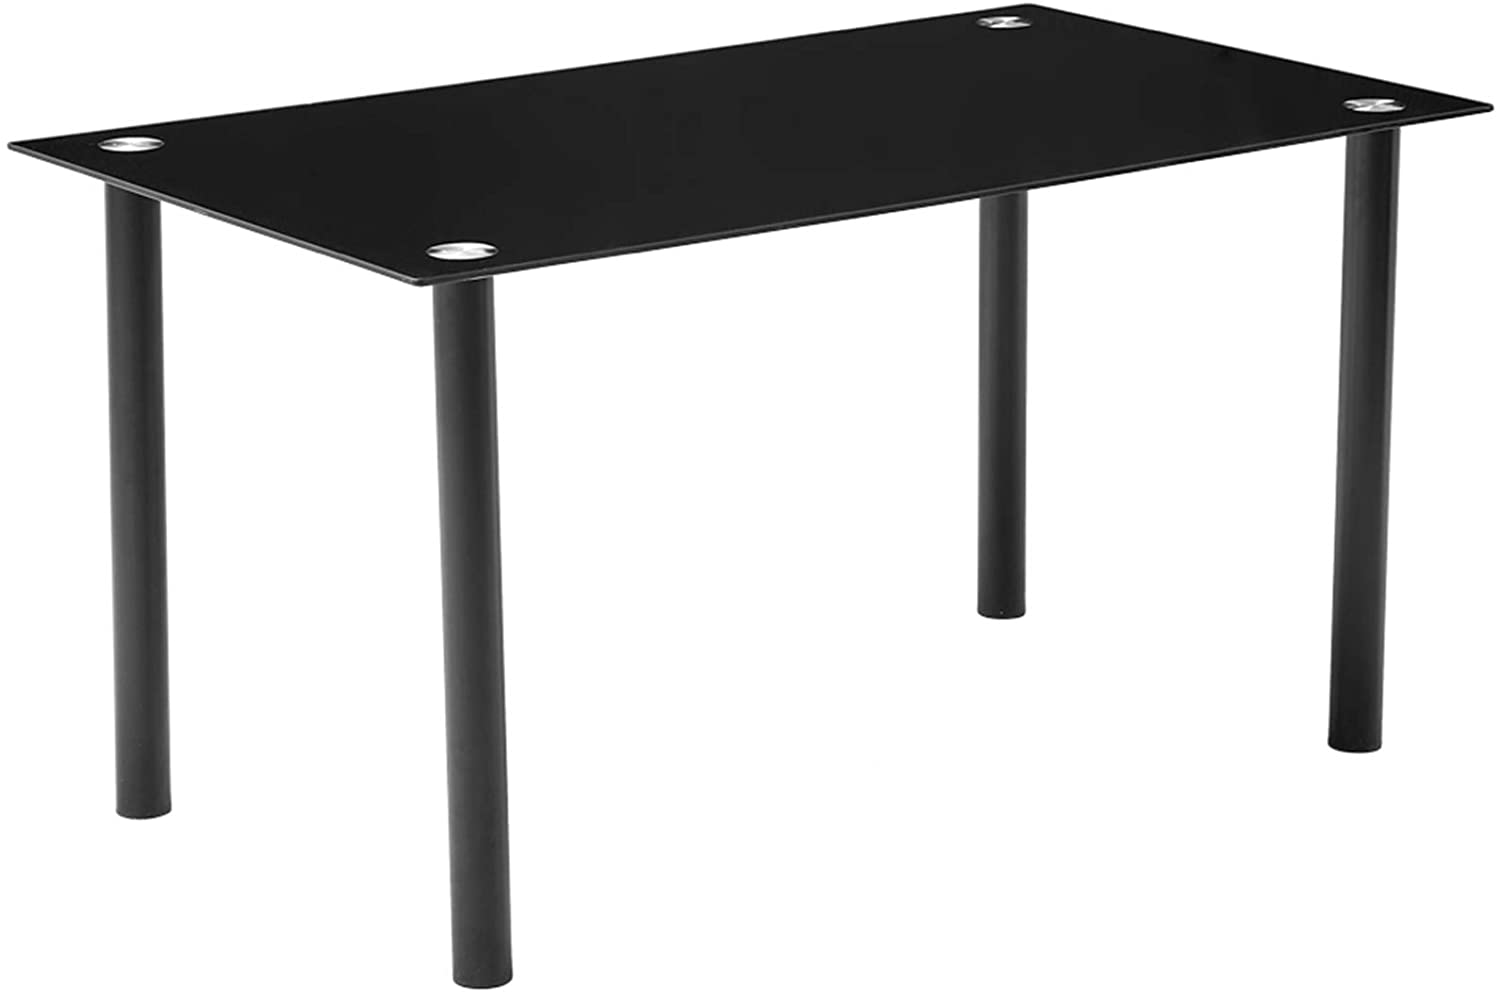 B08LNXKC53 1207075CM Simple Round Tube Table Leg Table Black Fancy Dining Table Dining Tables Dining Room Table for Small Spaces Kitchen Modern Table for Home Furniture